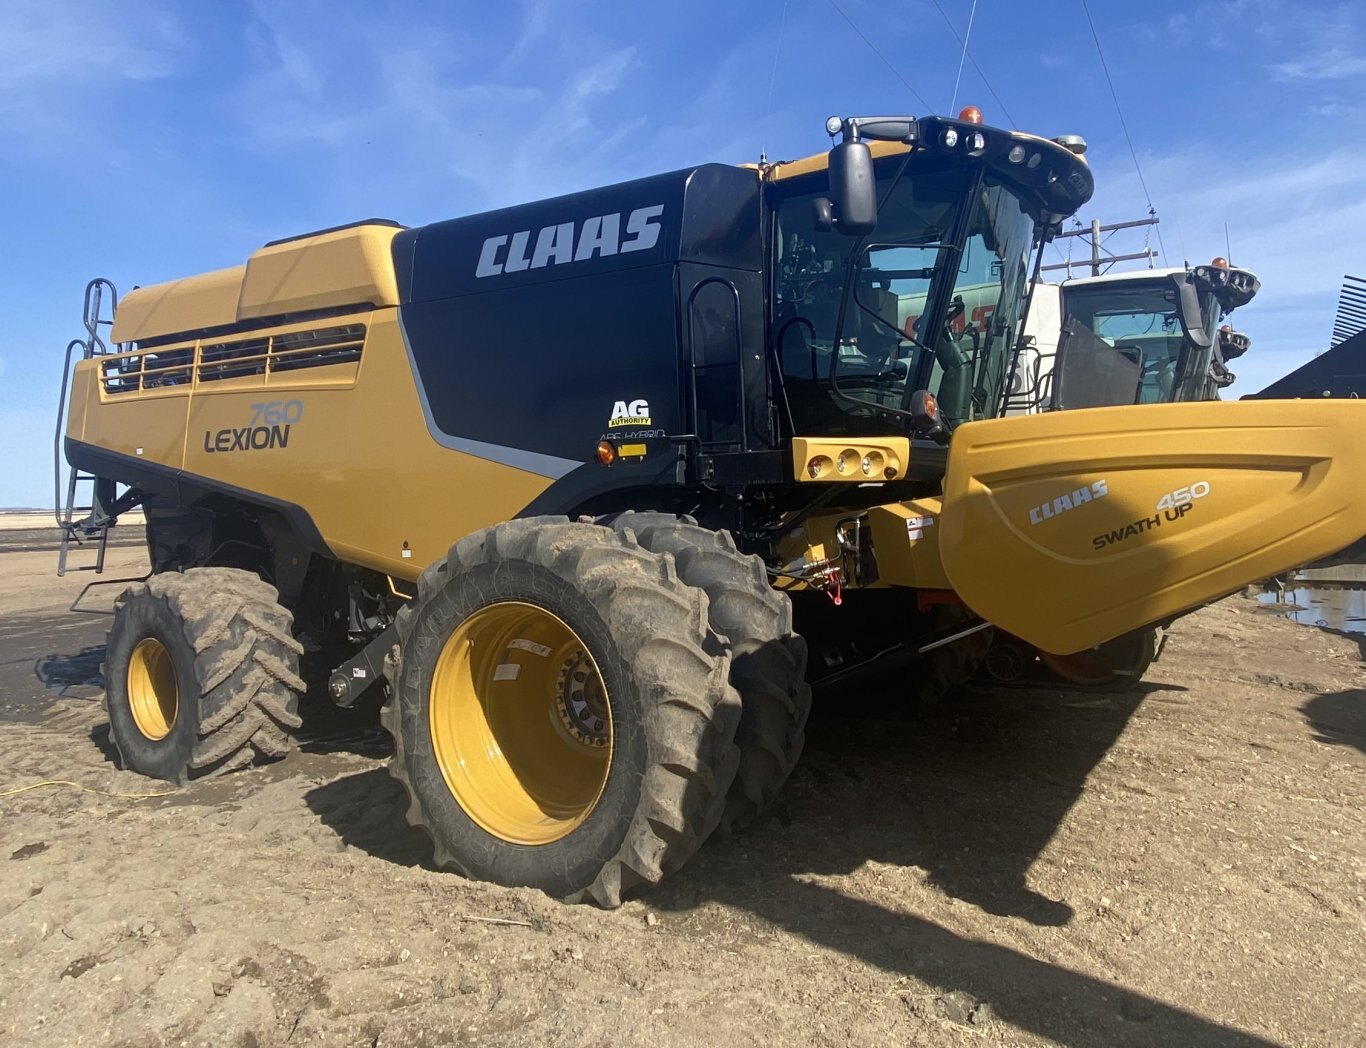 2015 CLAAS LEXION 760, 1385 Hours